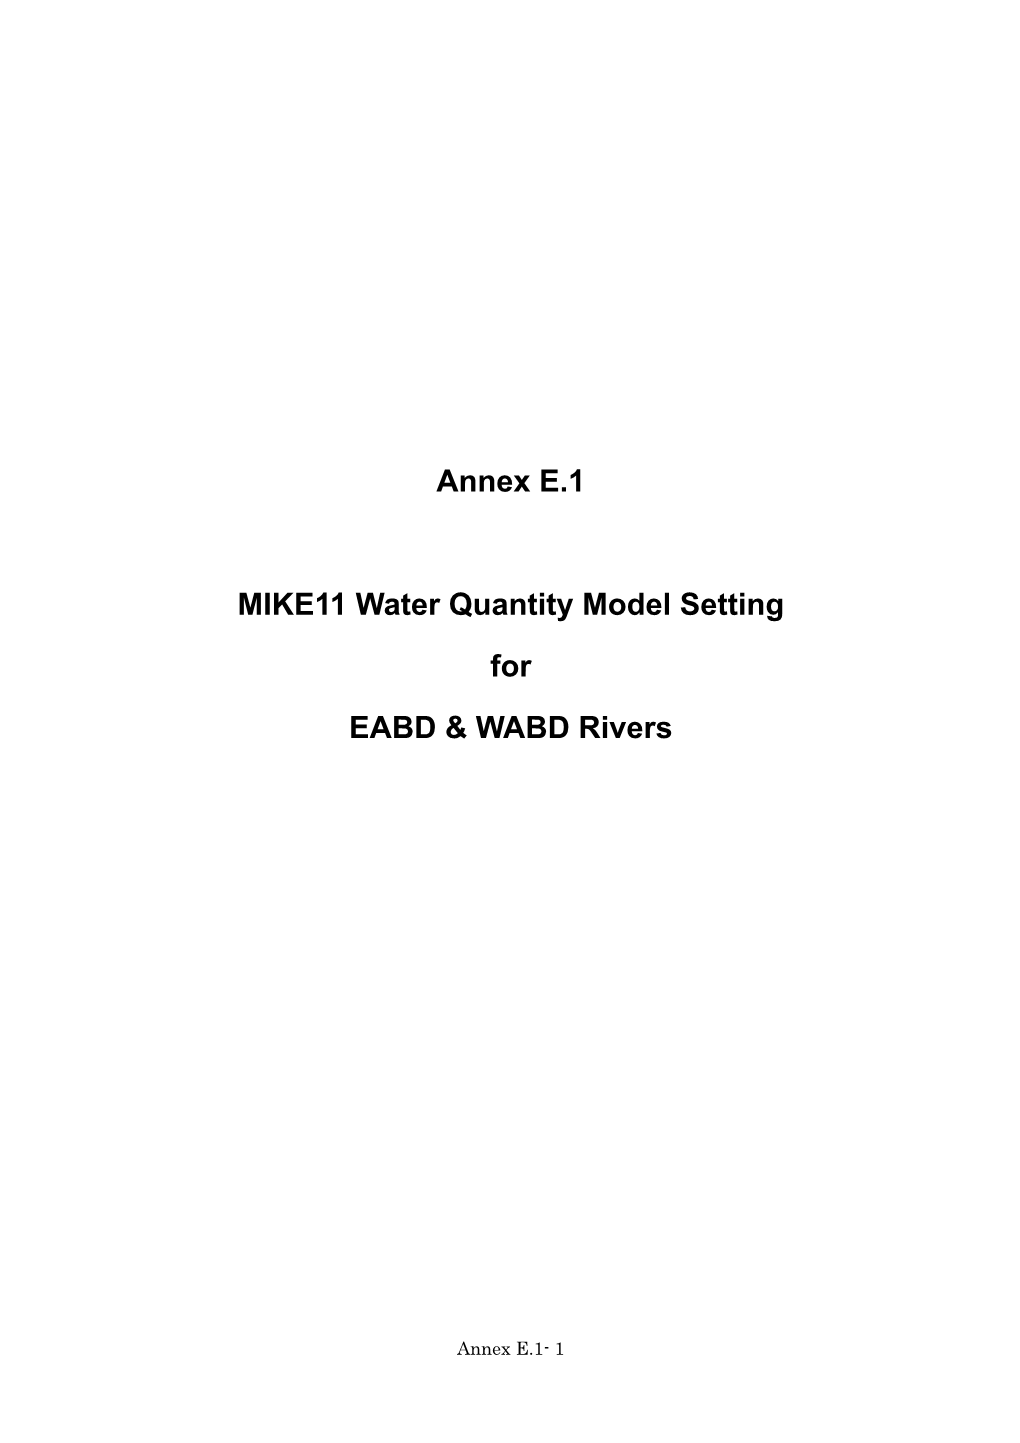 Annex E.1 MIKE11 Water Quantity Model Setting for EABD & WABD